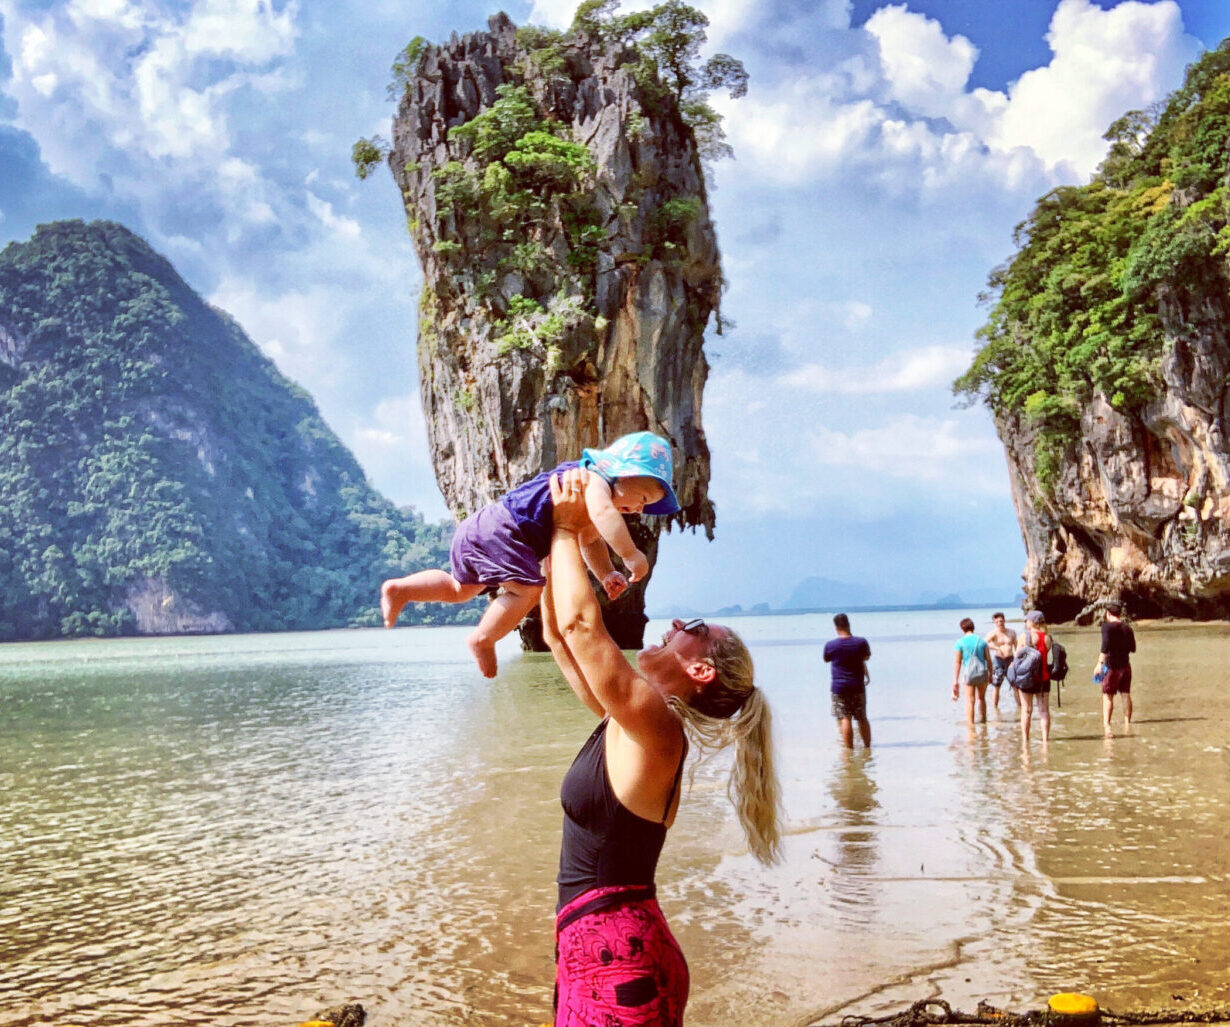 THINGS TO DO IN PHUKET WITH KIDS